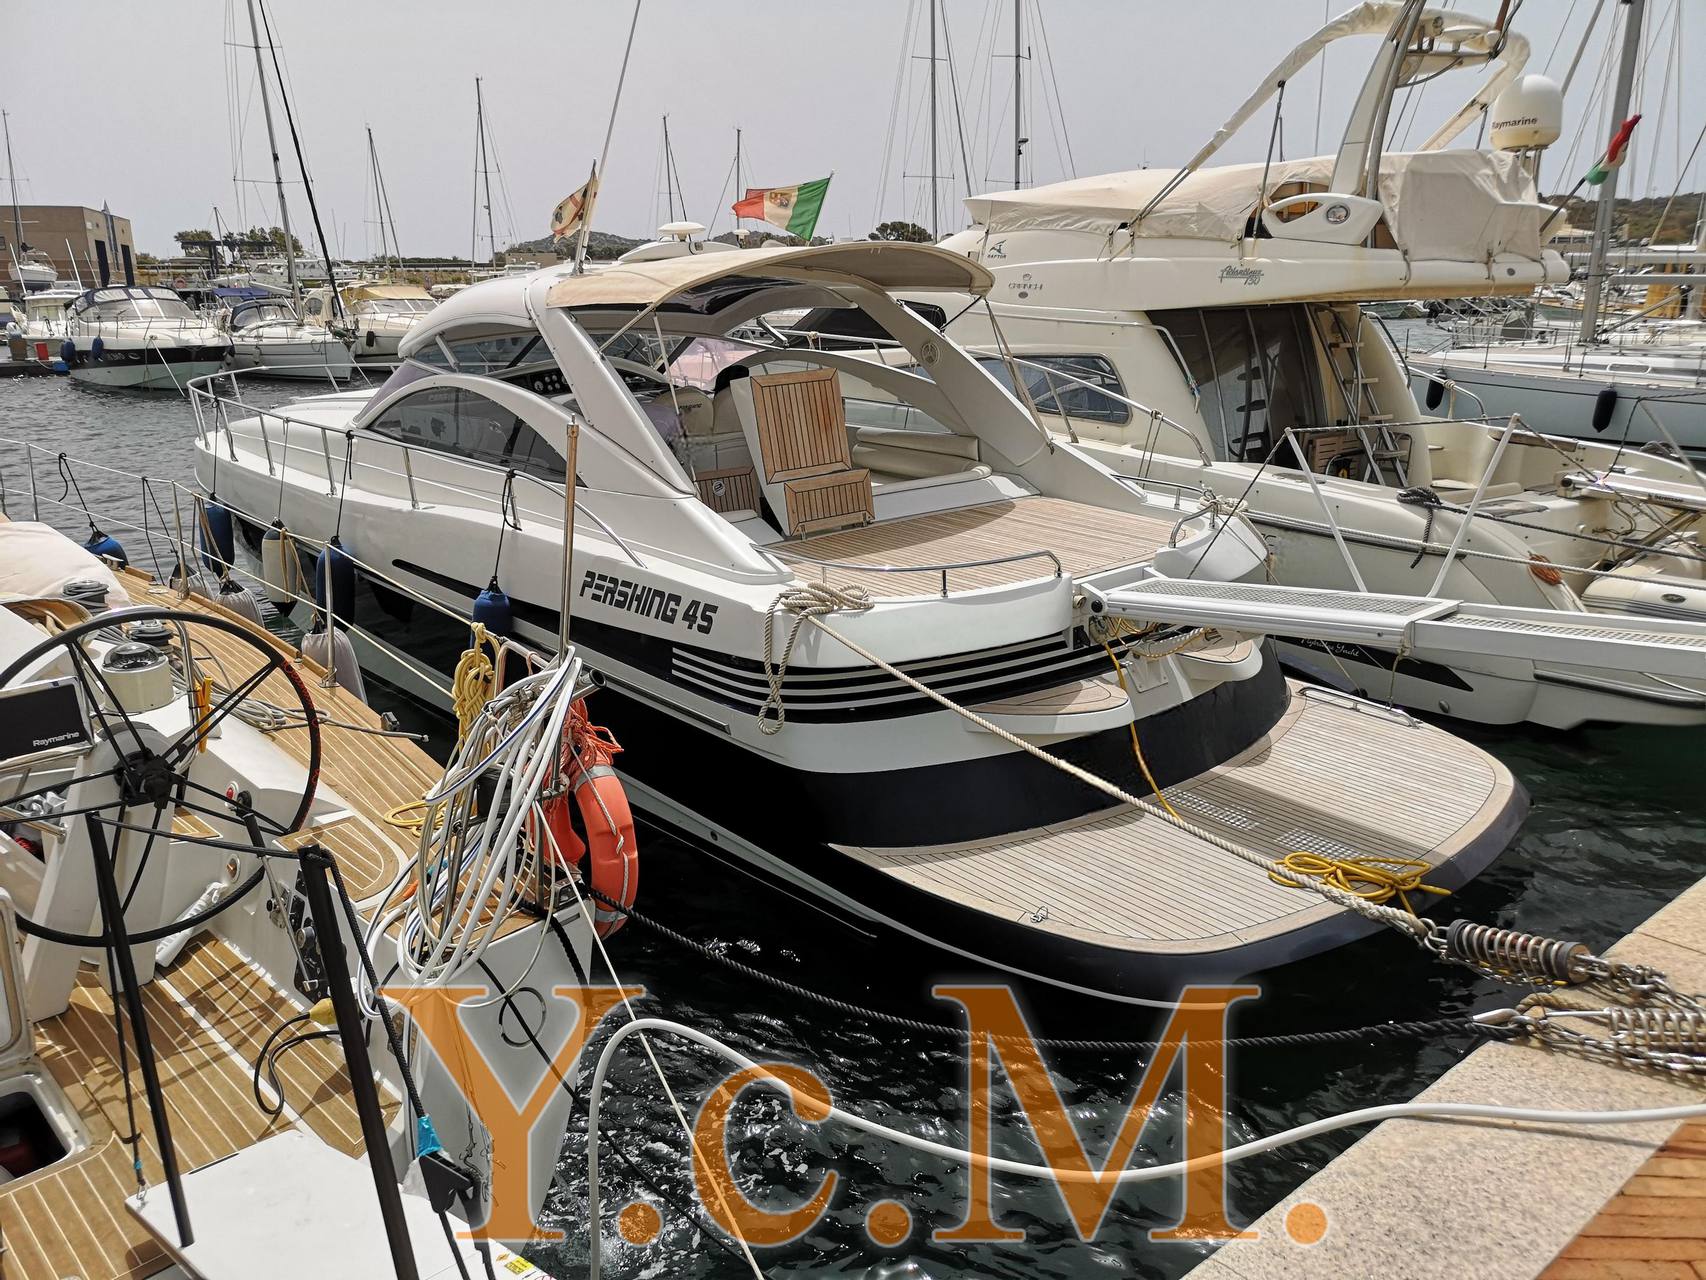 PERSHING 45 ht Motor boat used for sale